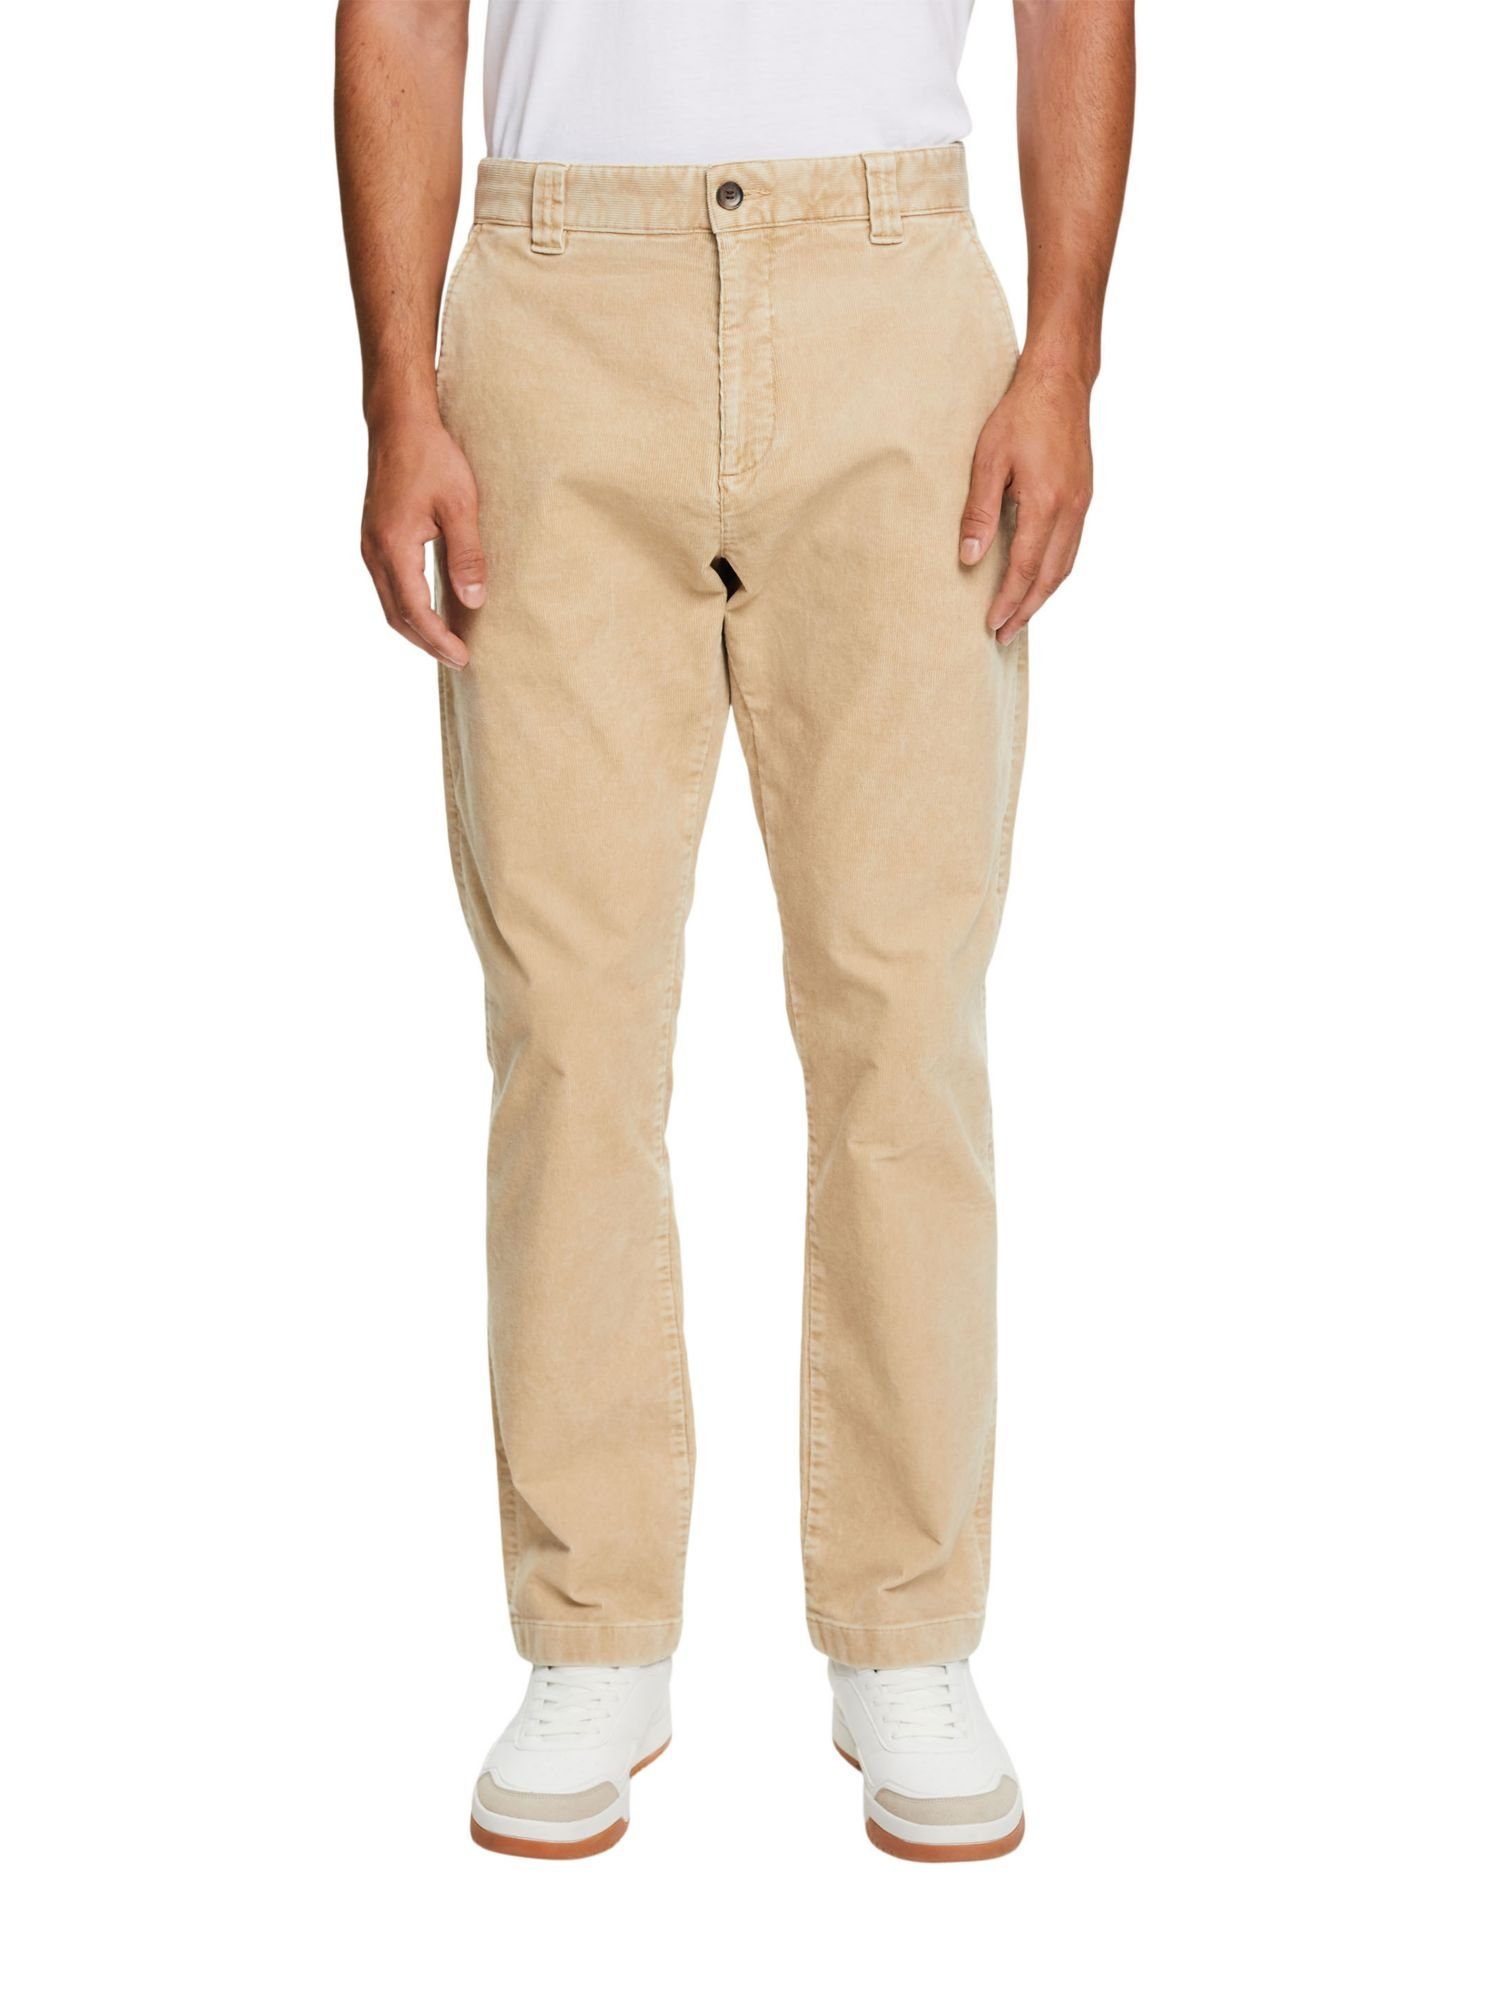 Straight-Jeans Collection Esprit Passform in Cordhose gerader